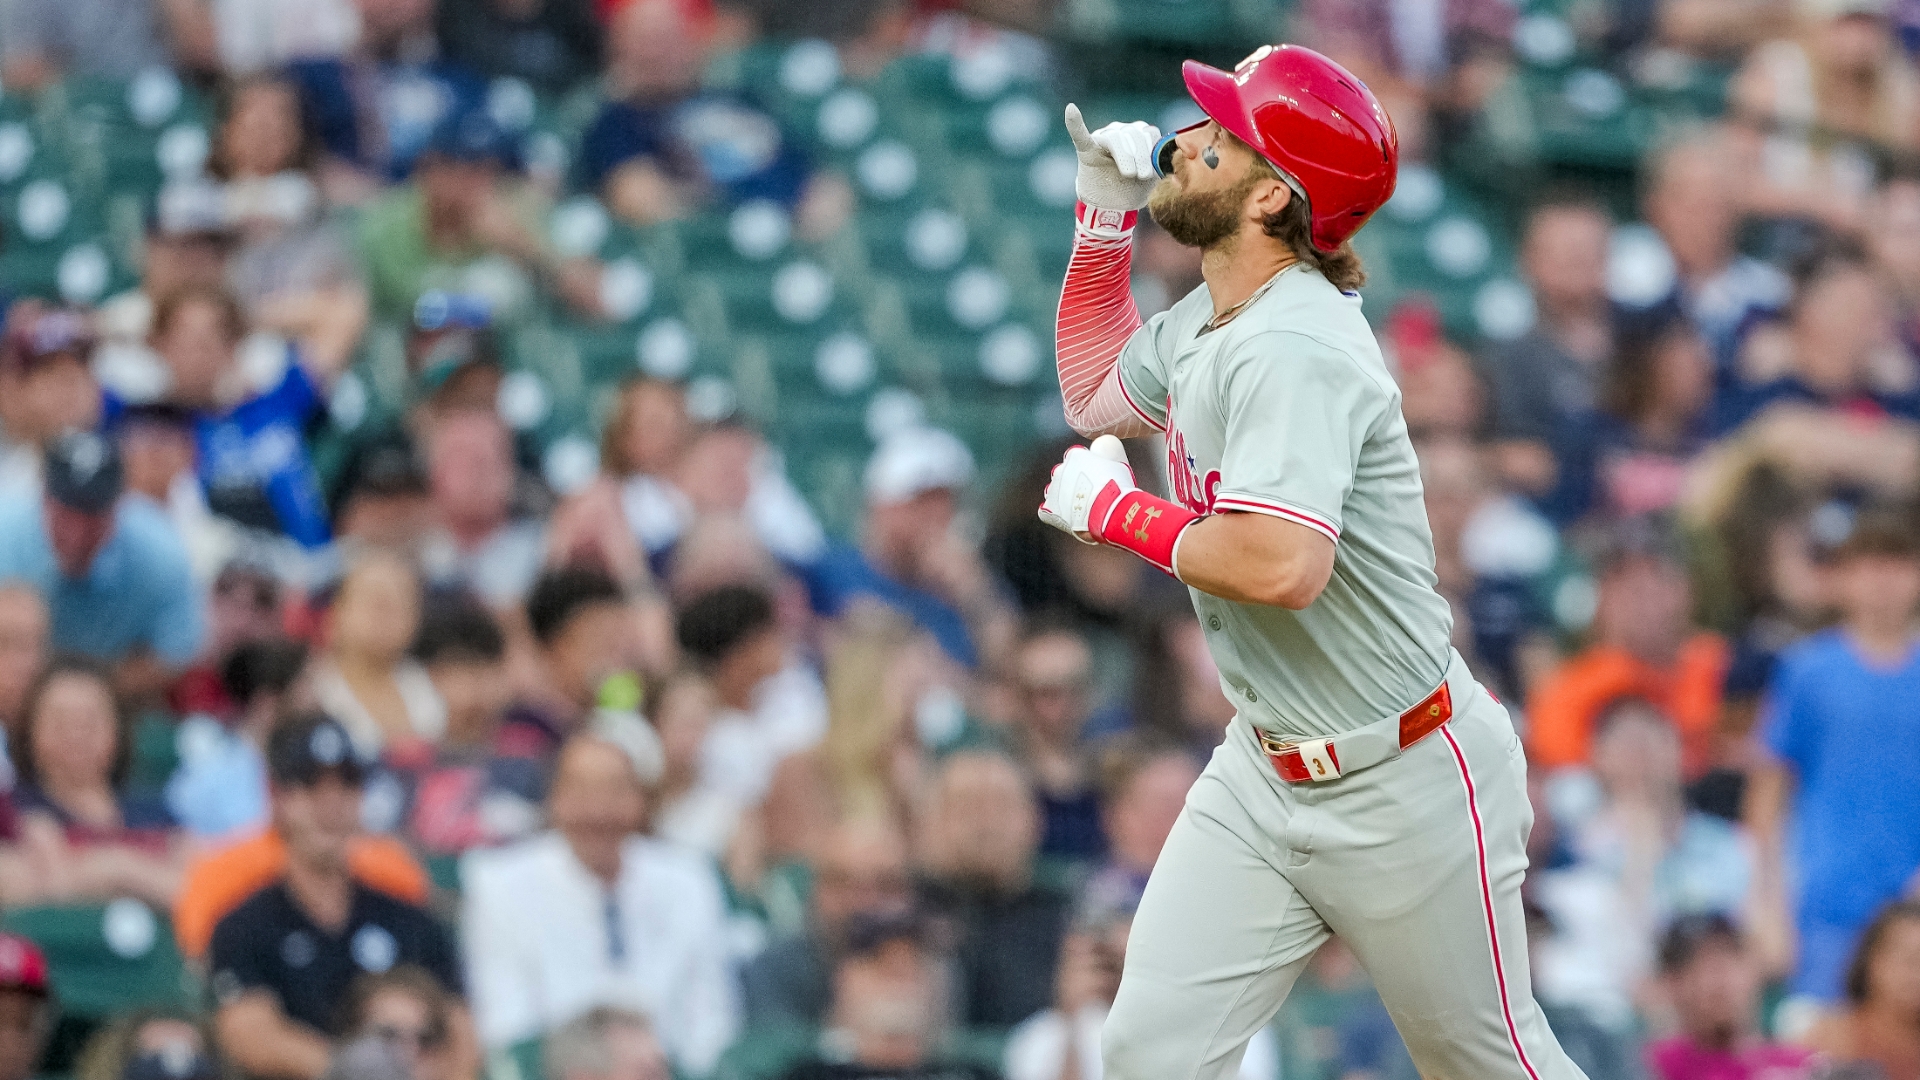 Bryce Harper balls out with 2 doubles and a HR